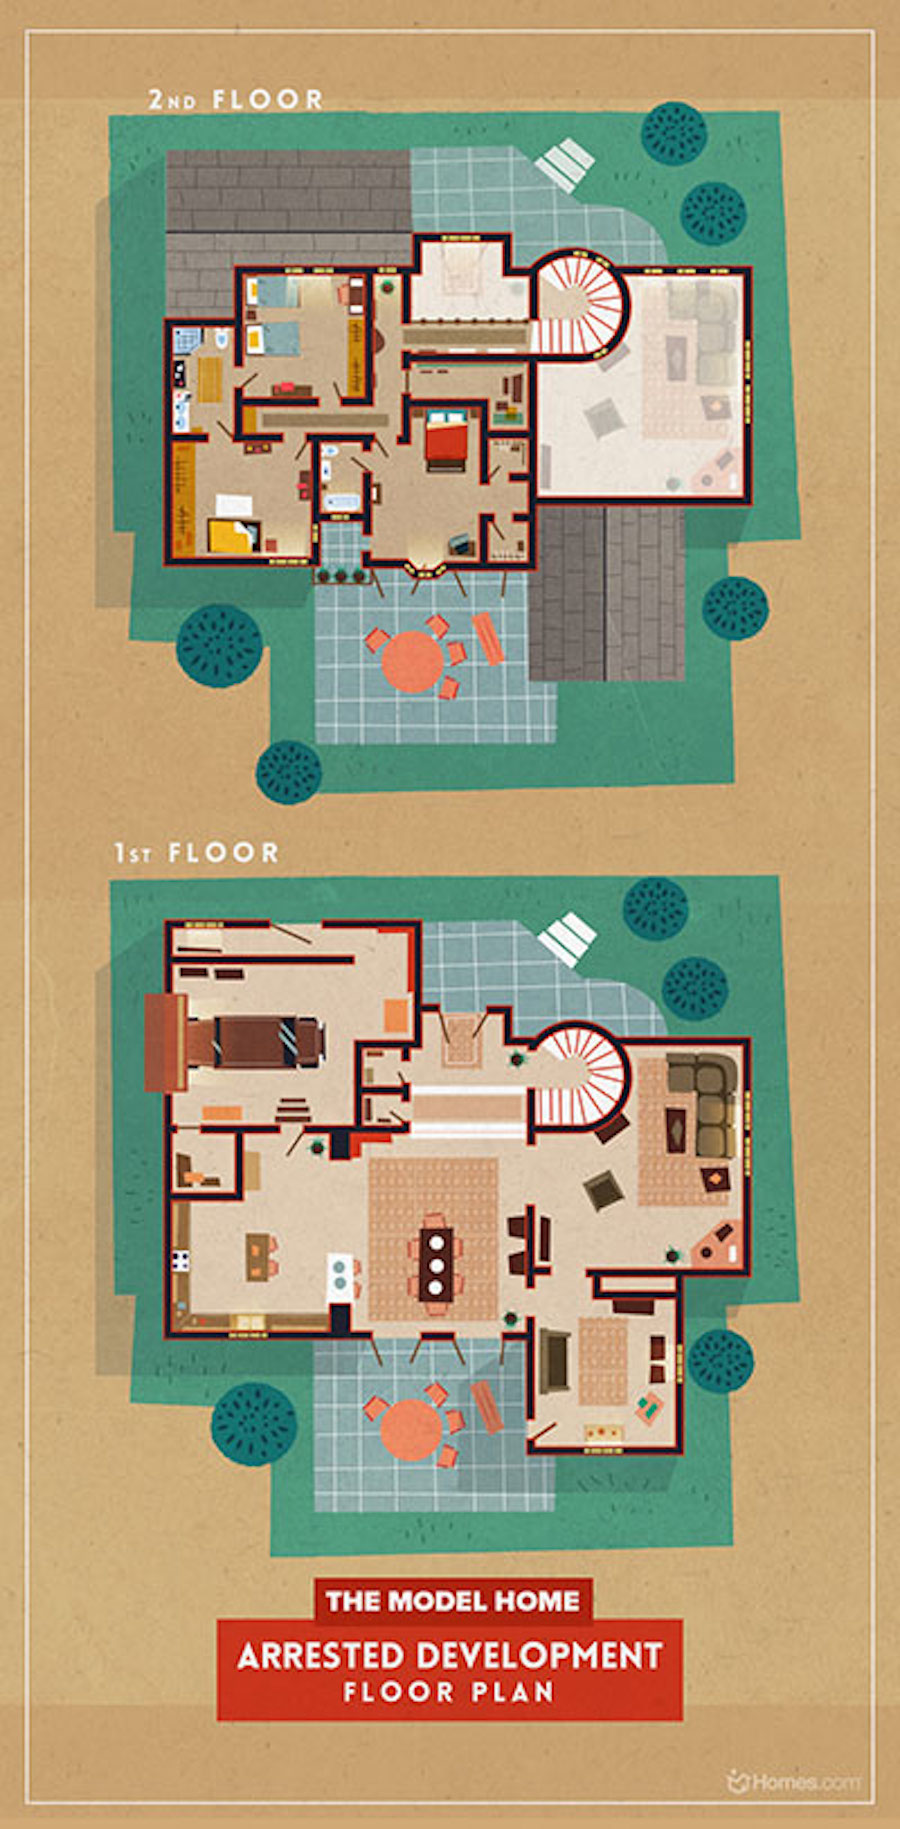 Home Floor Plans of Famous TV Shows-1